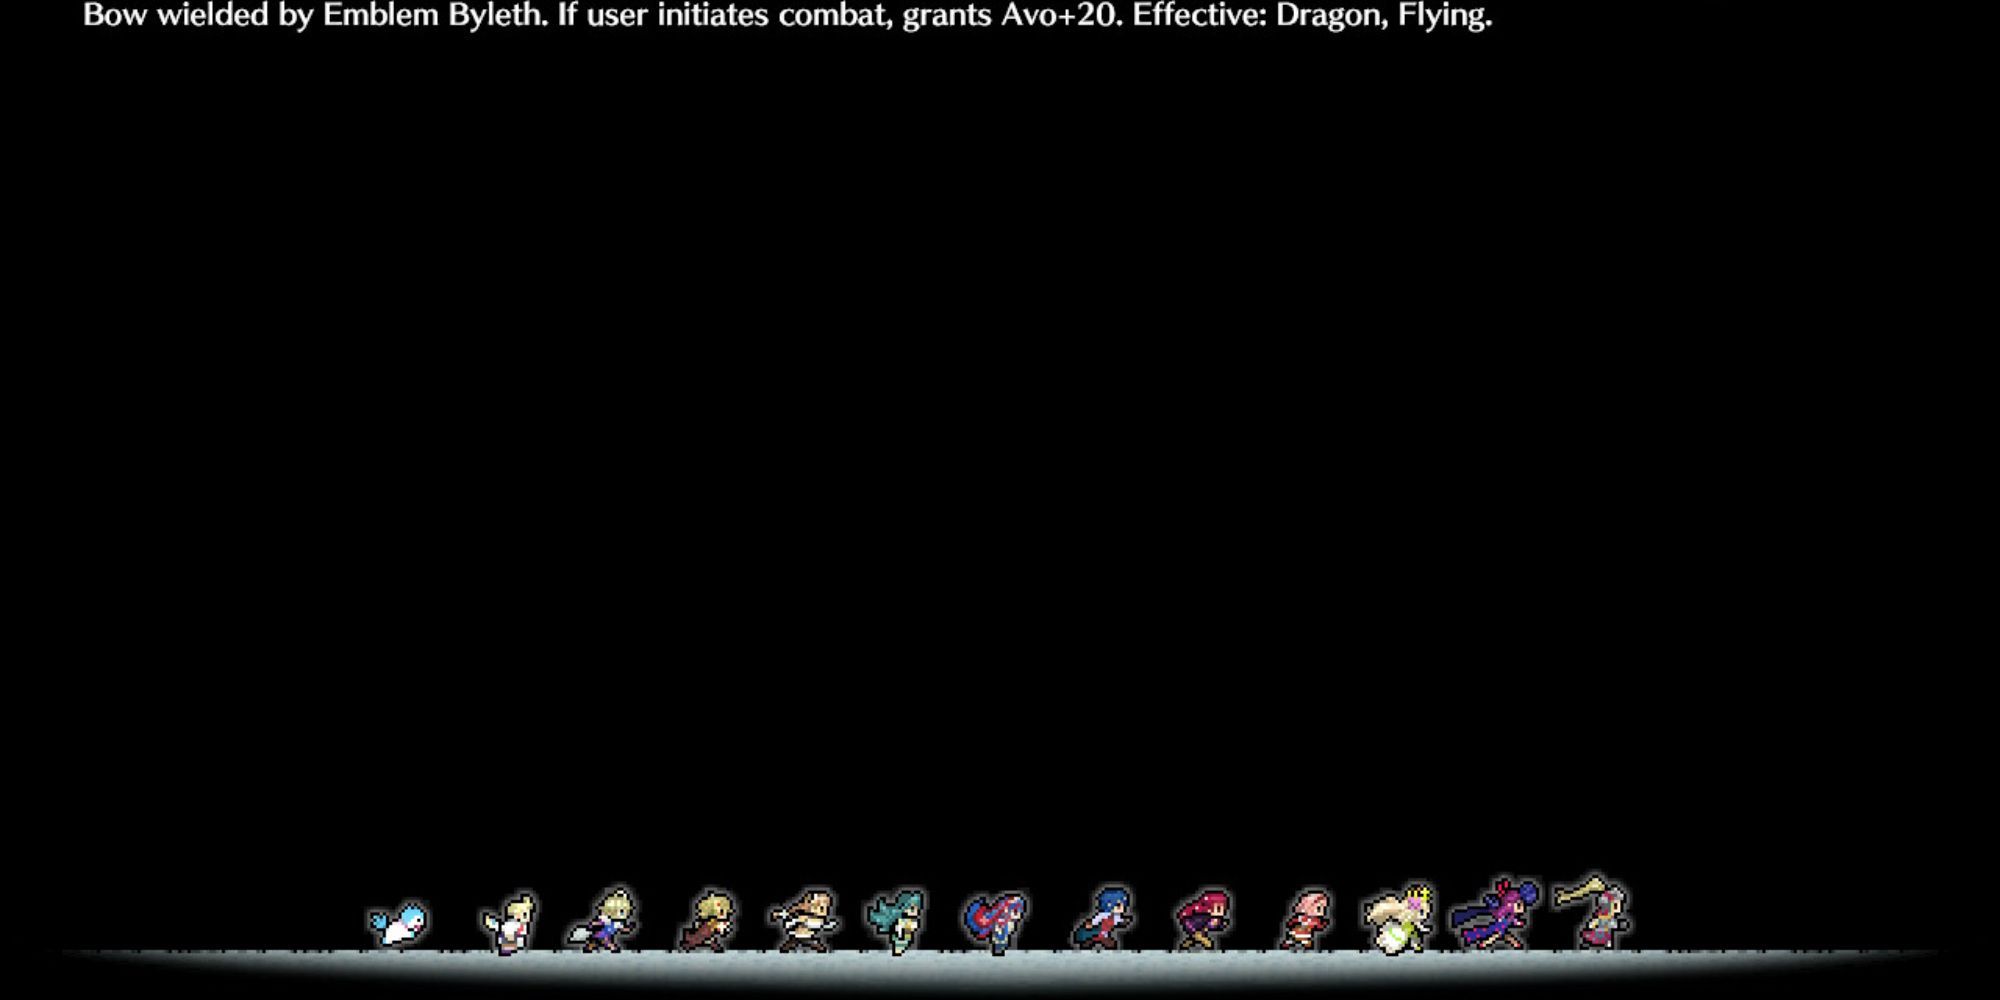 Fire Emblem Engage - loading screen sprites running along the bottom of the screen